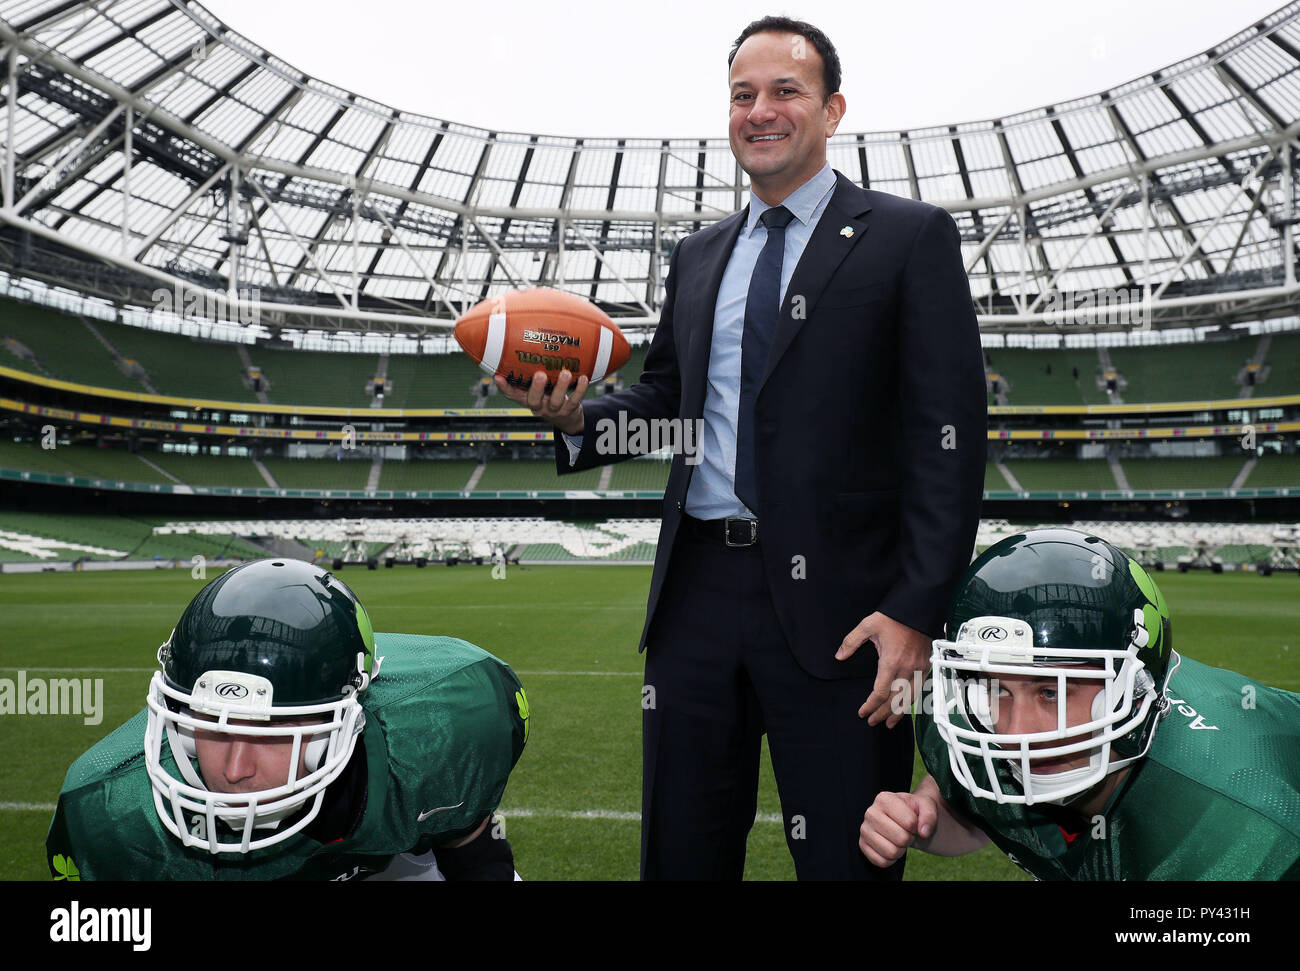 An Taoiseach Leo Varadkar with players from Cork Admirals American football team Cillian McGillycuddy (left) and Aidan Waters, at the Aviva stadium, Dublin, for the announcement of plans for a five-game American college football series. Stock Photo